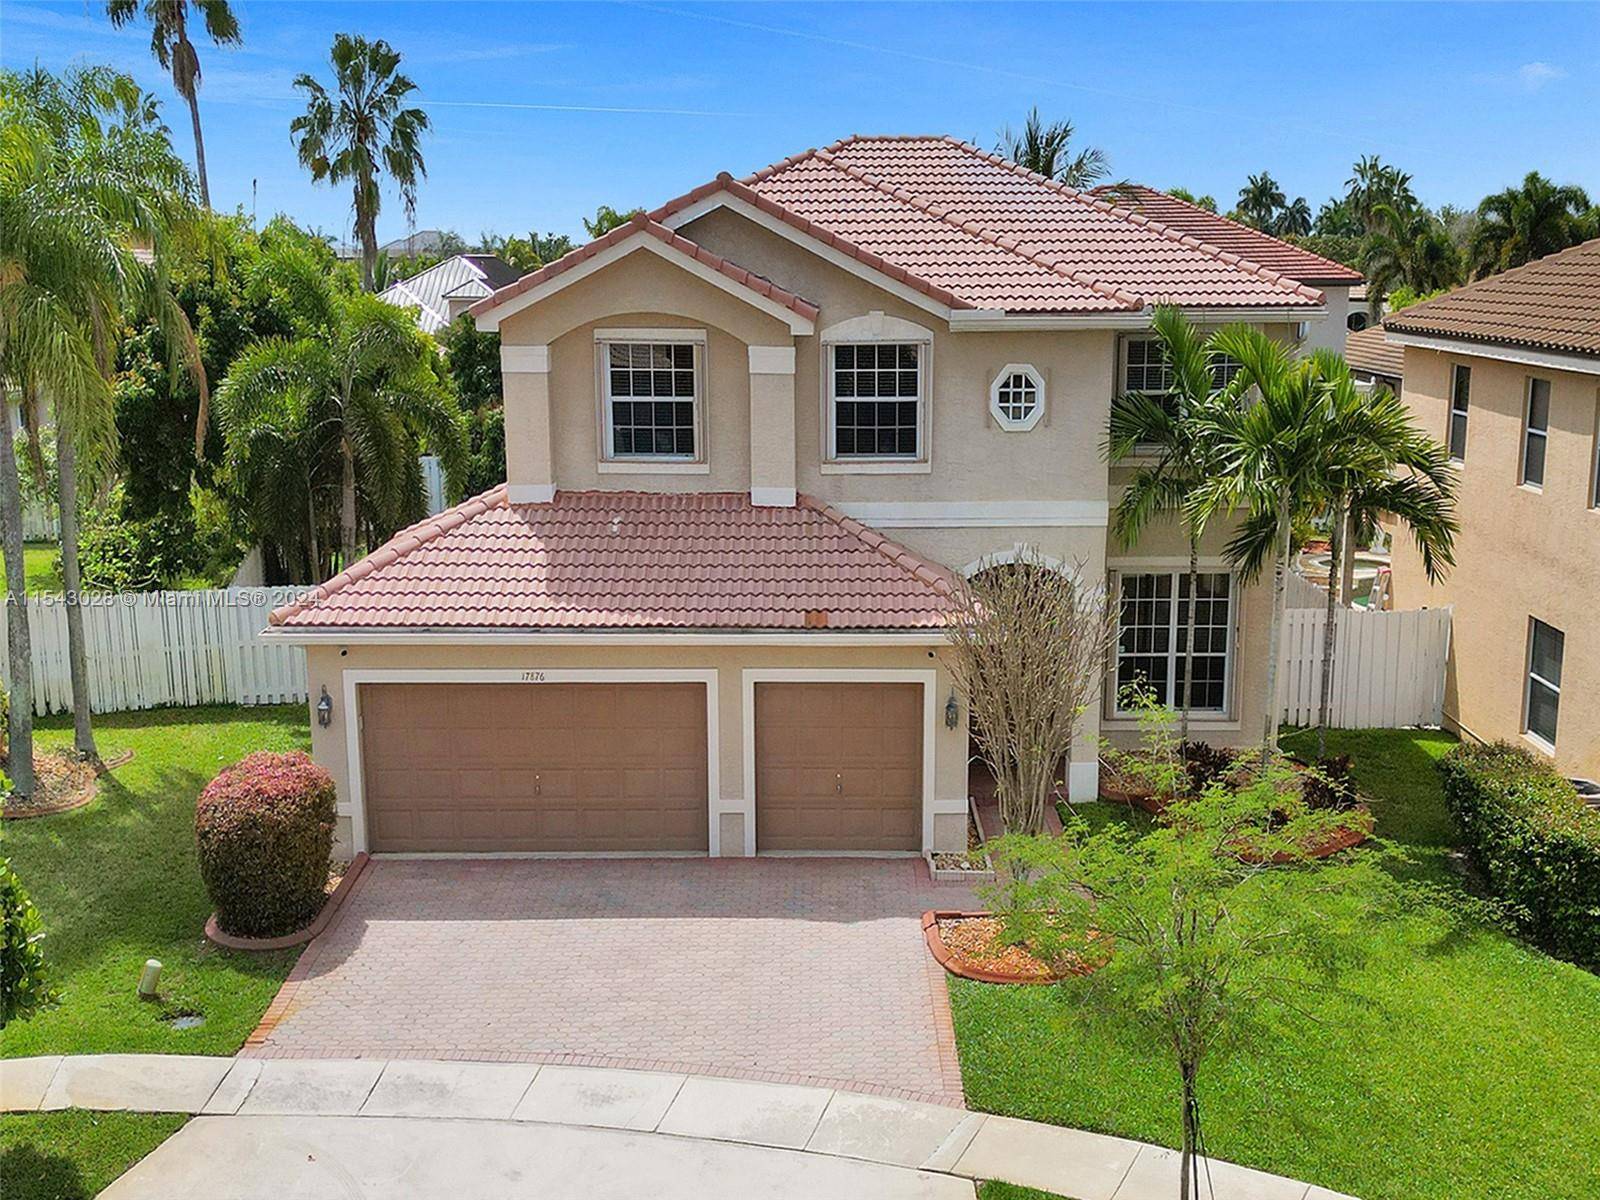 Two story dream home in the gated community of Silver Lakes.